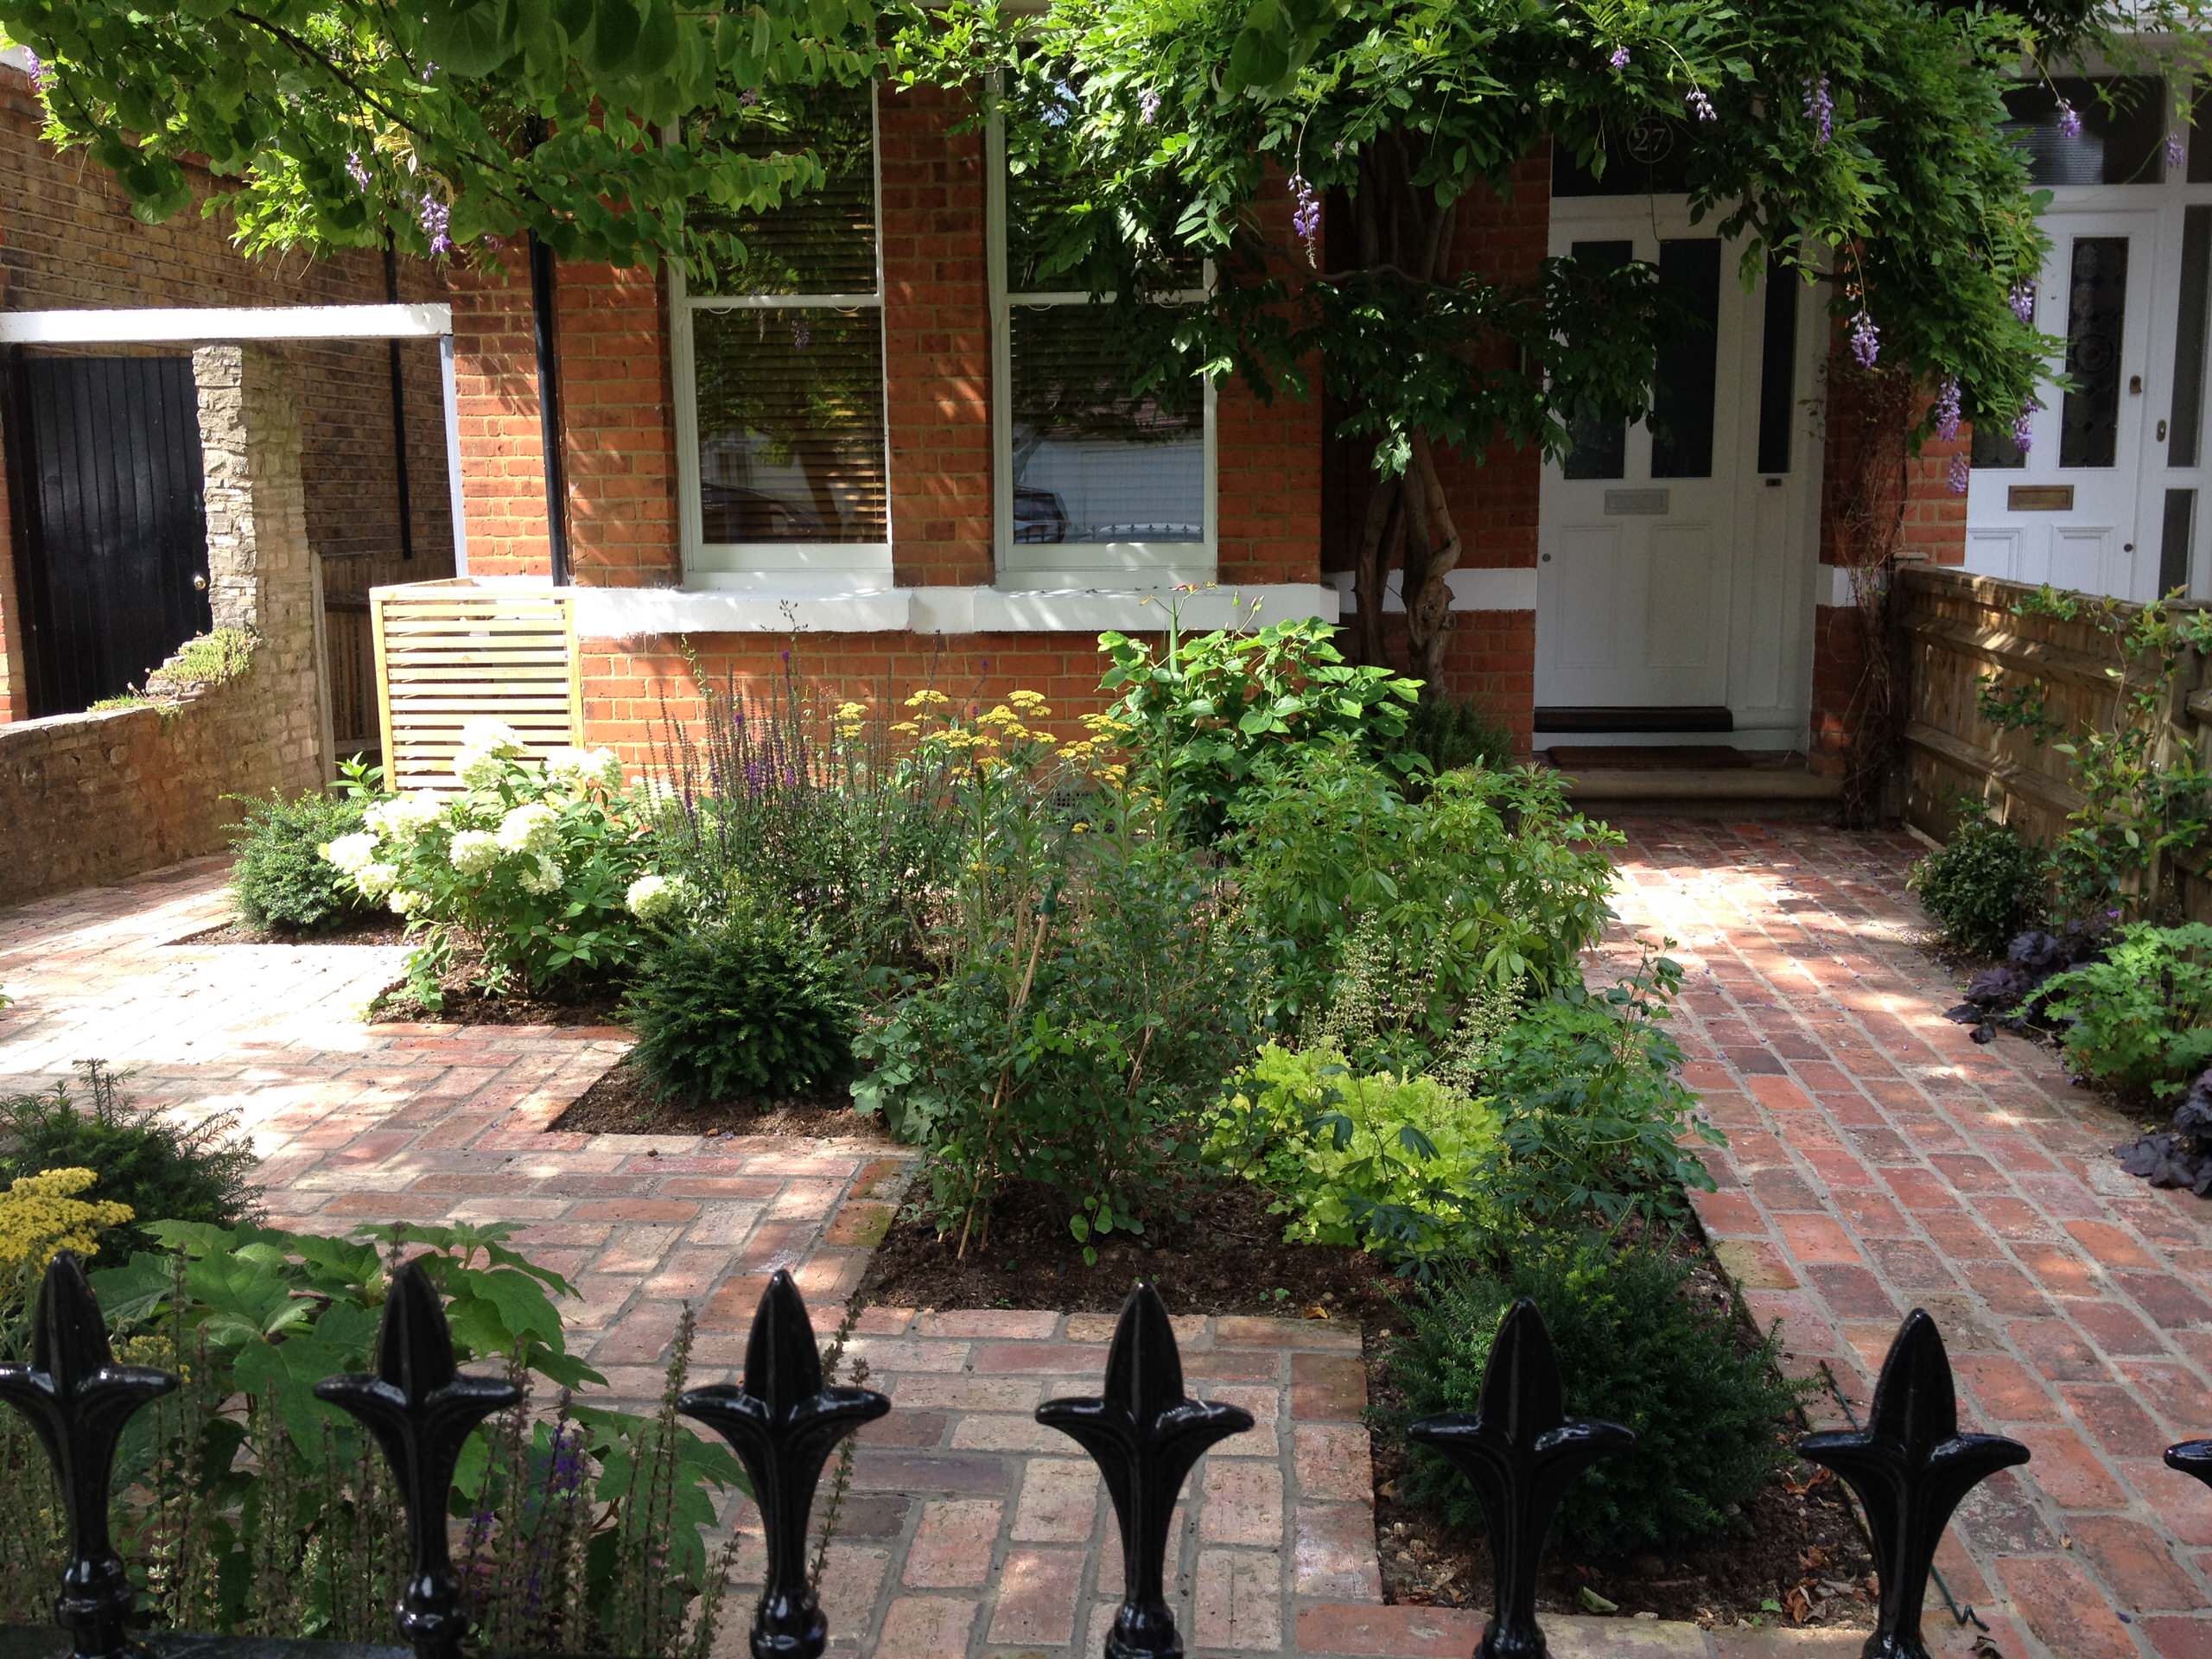  Design Ideas For Small Front Gardens Houzz Uk - Landscaping Ideas For Small Front Gardens Uk